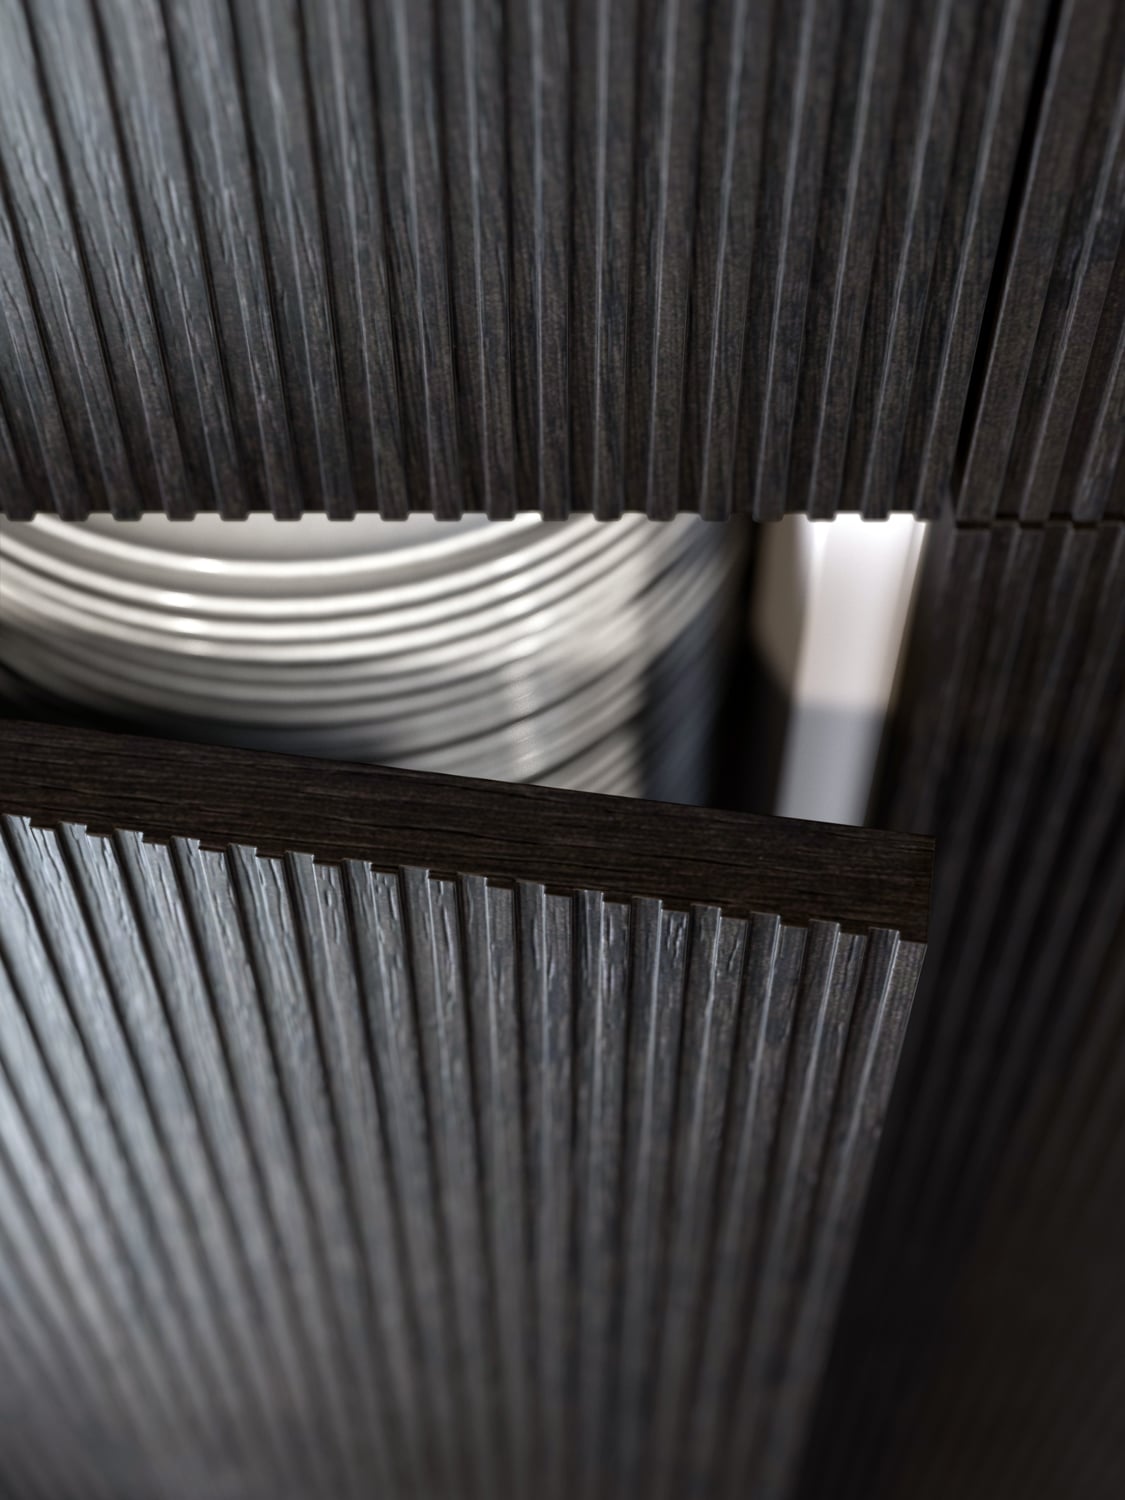 A 3D manufacturing process creates a ribbed surface on the wood veneer.